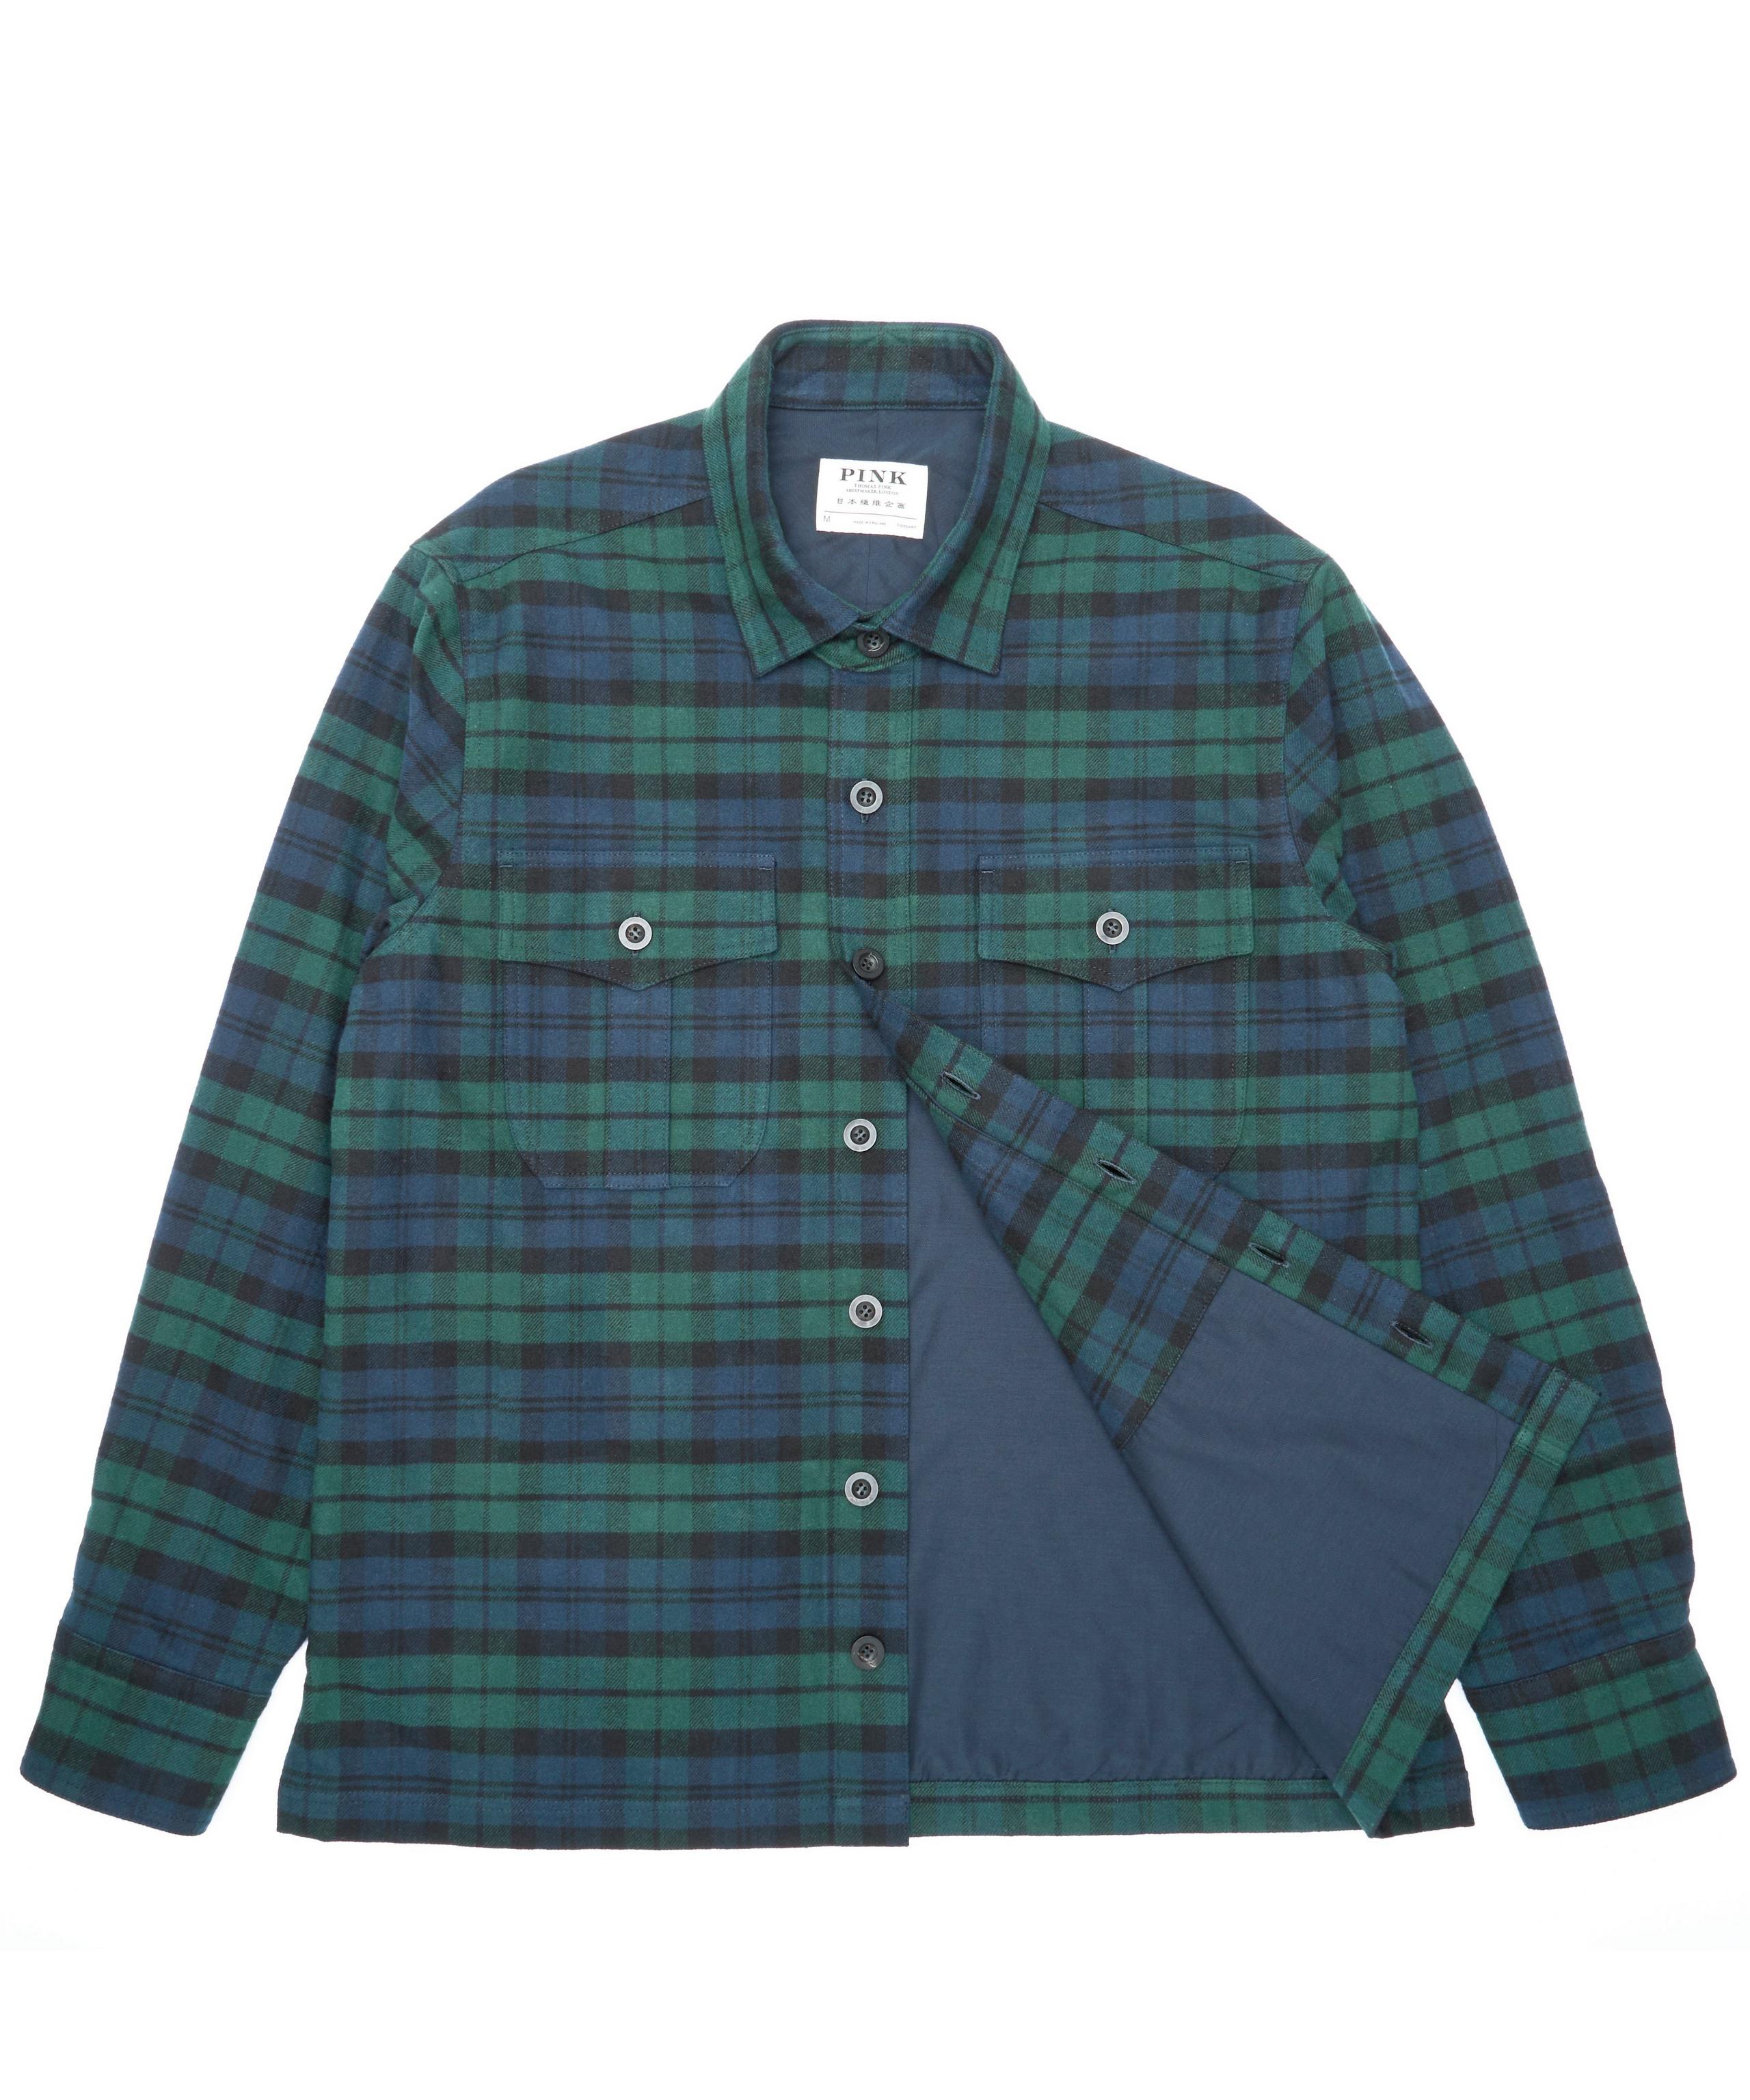 Green & Navy Cotton Twill Check Overshirt with Throat Latch